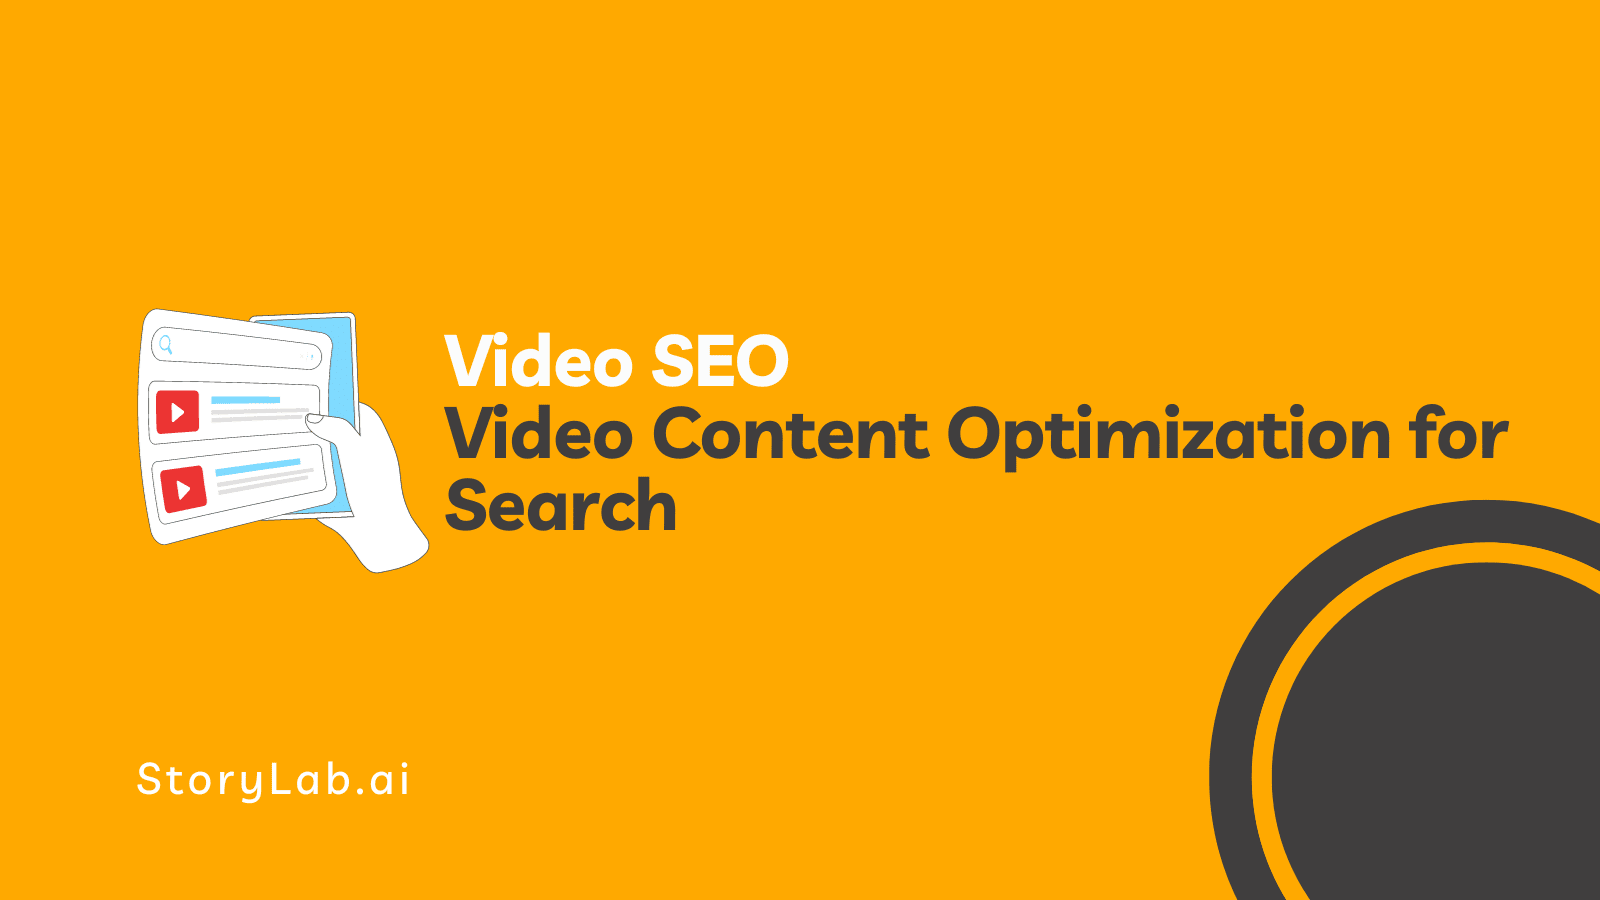 Video SEO: How to Optimize Video Content for Search